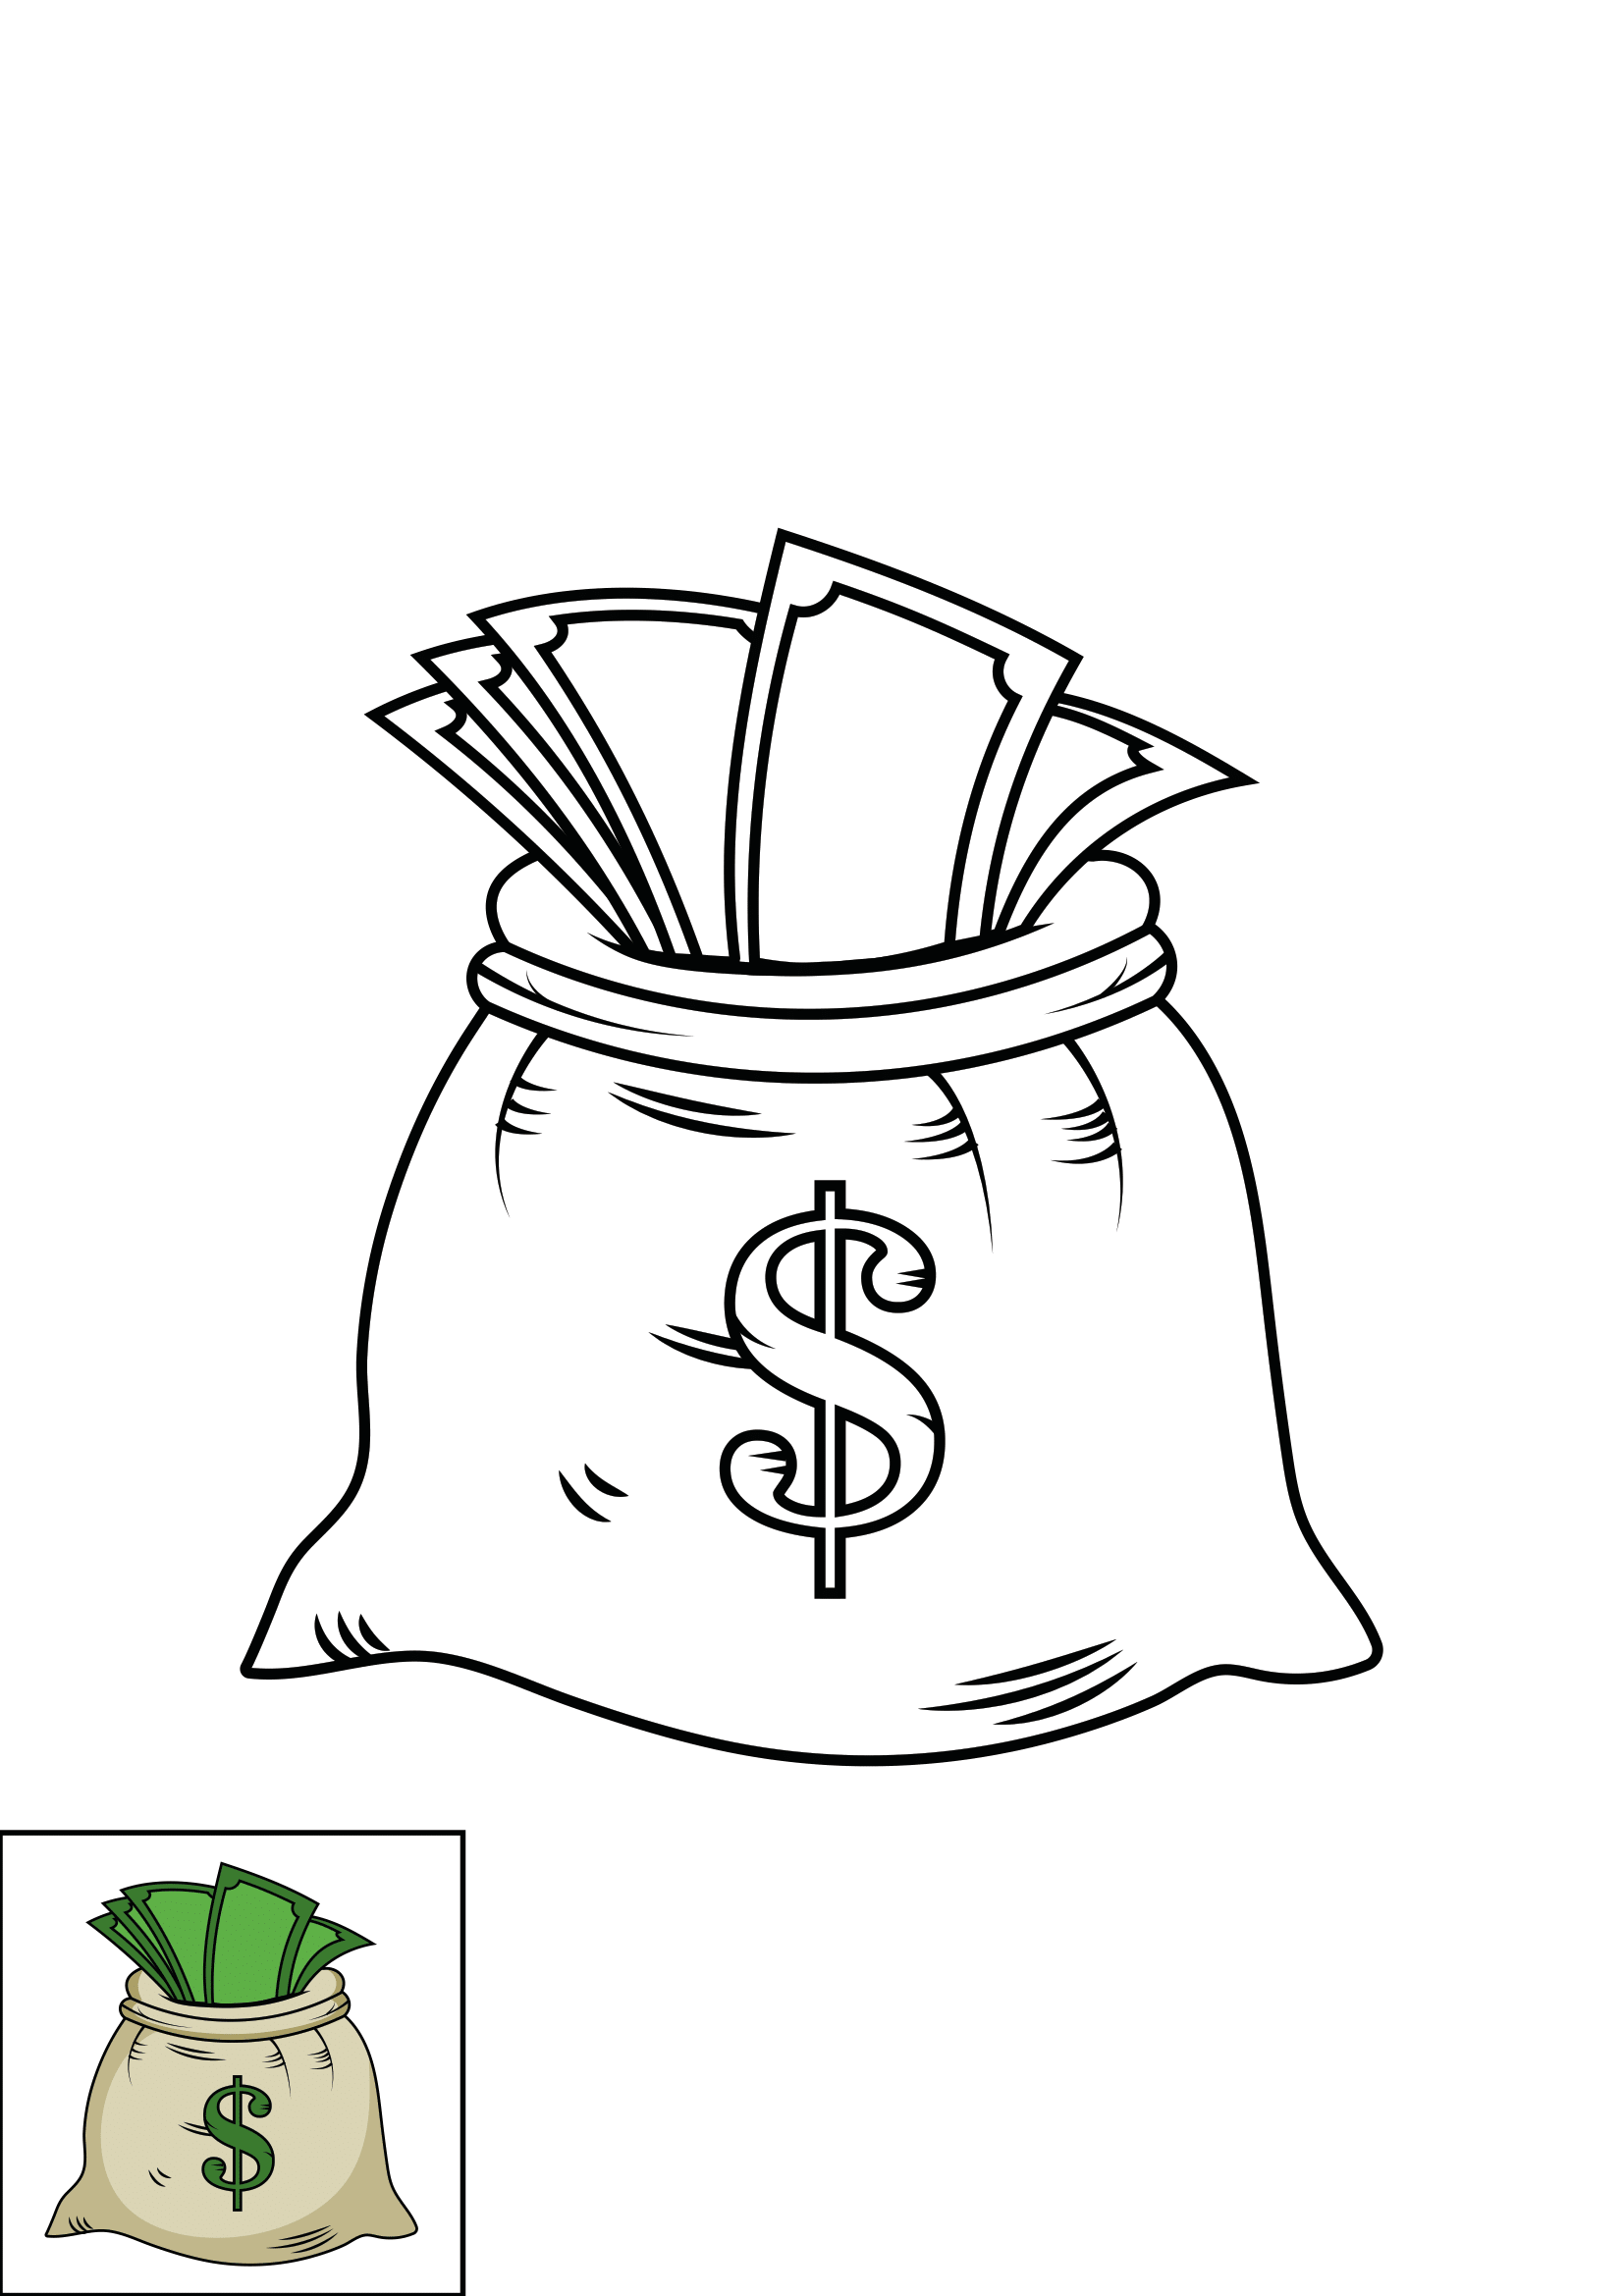 How to Draw A Money Bag Step by Step Printable Color